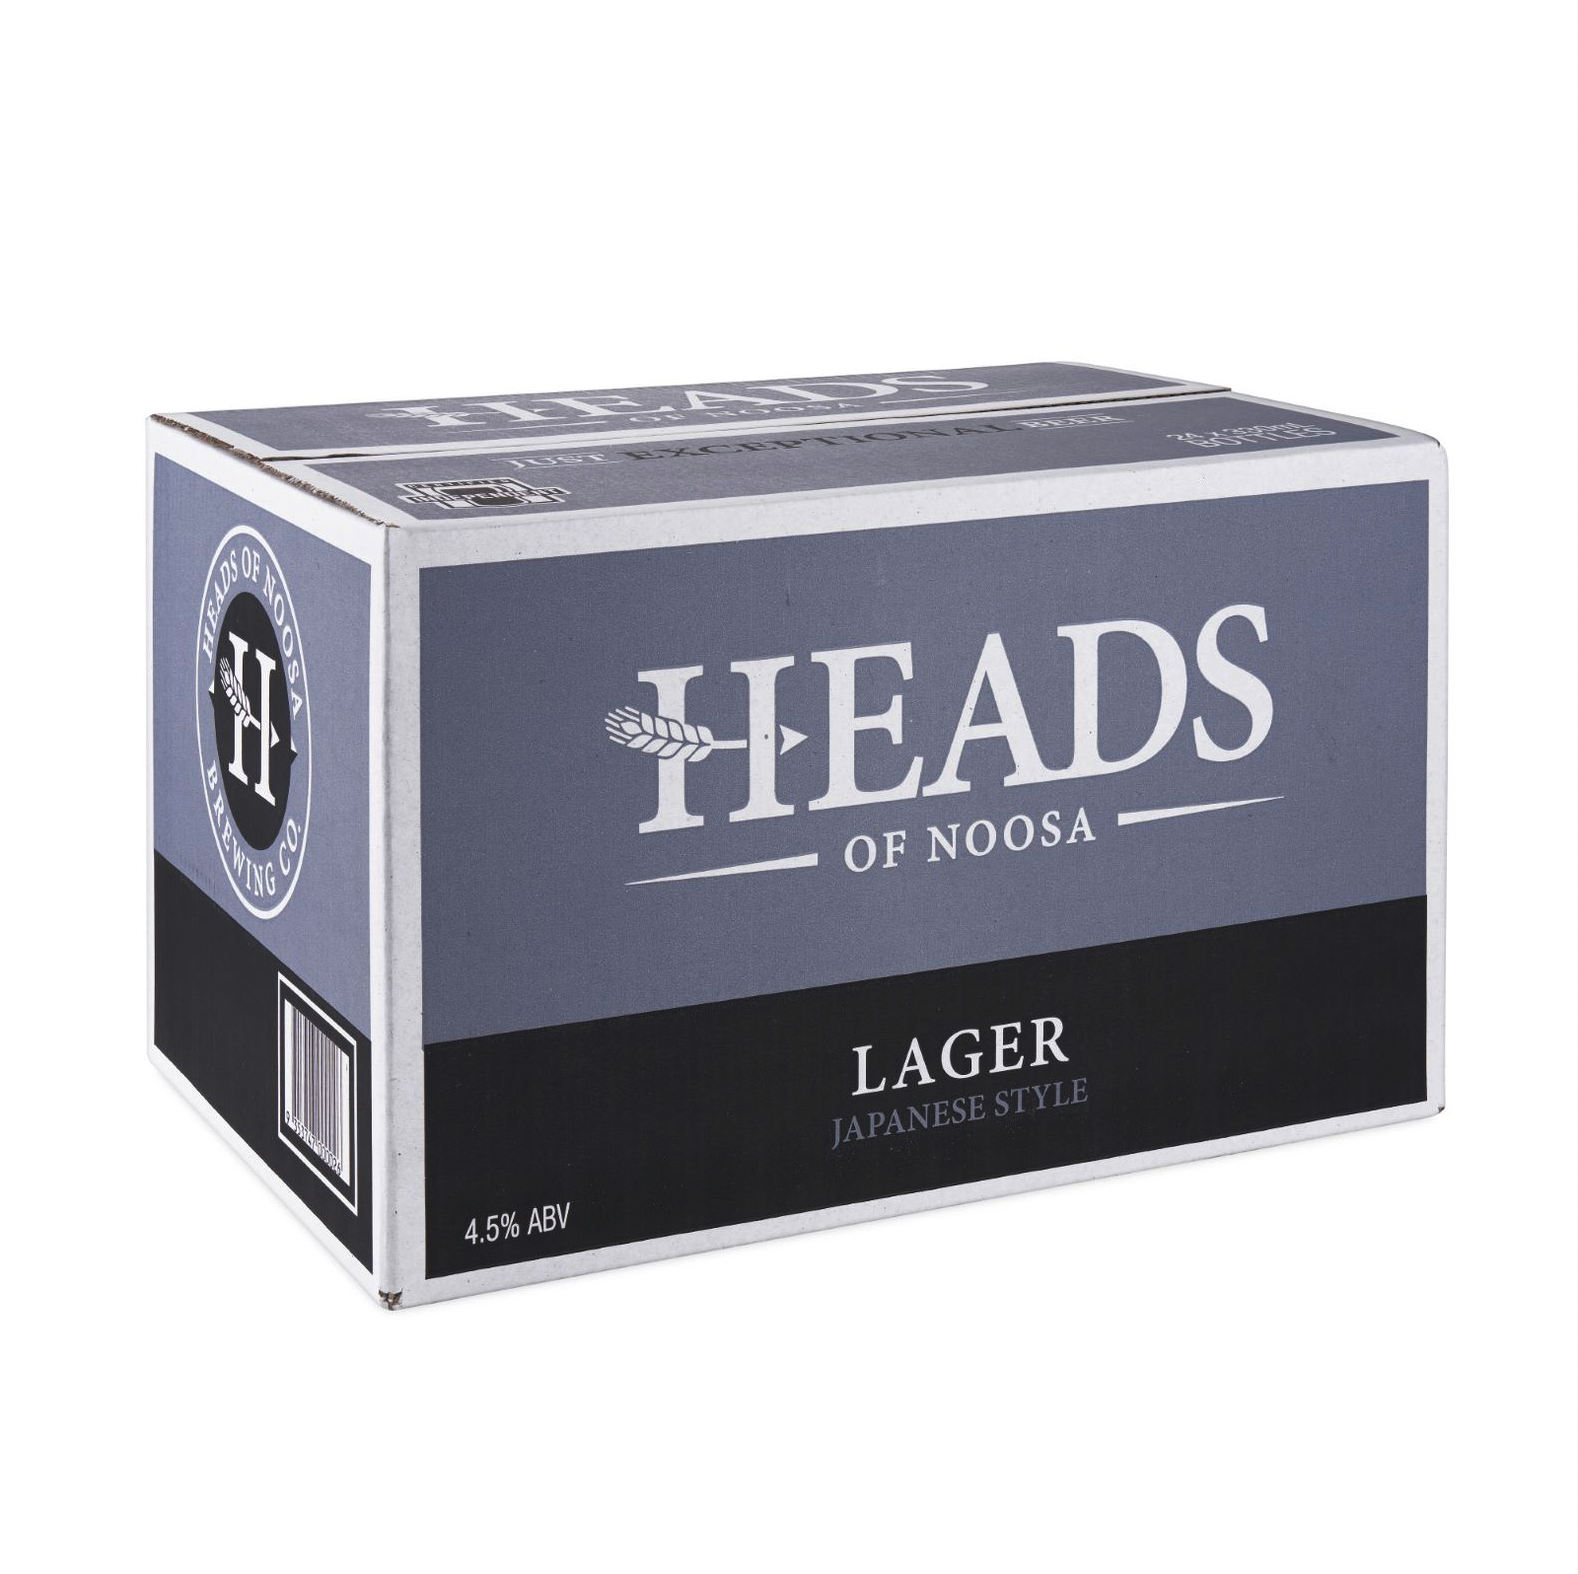 Heads Of Noosa Brewing Japanese Style Lager Carton 24 x 330ml bottles